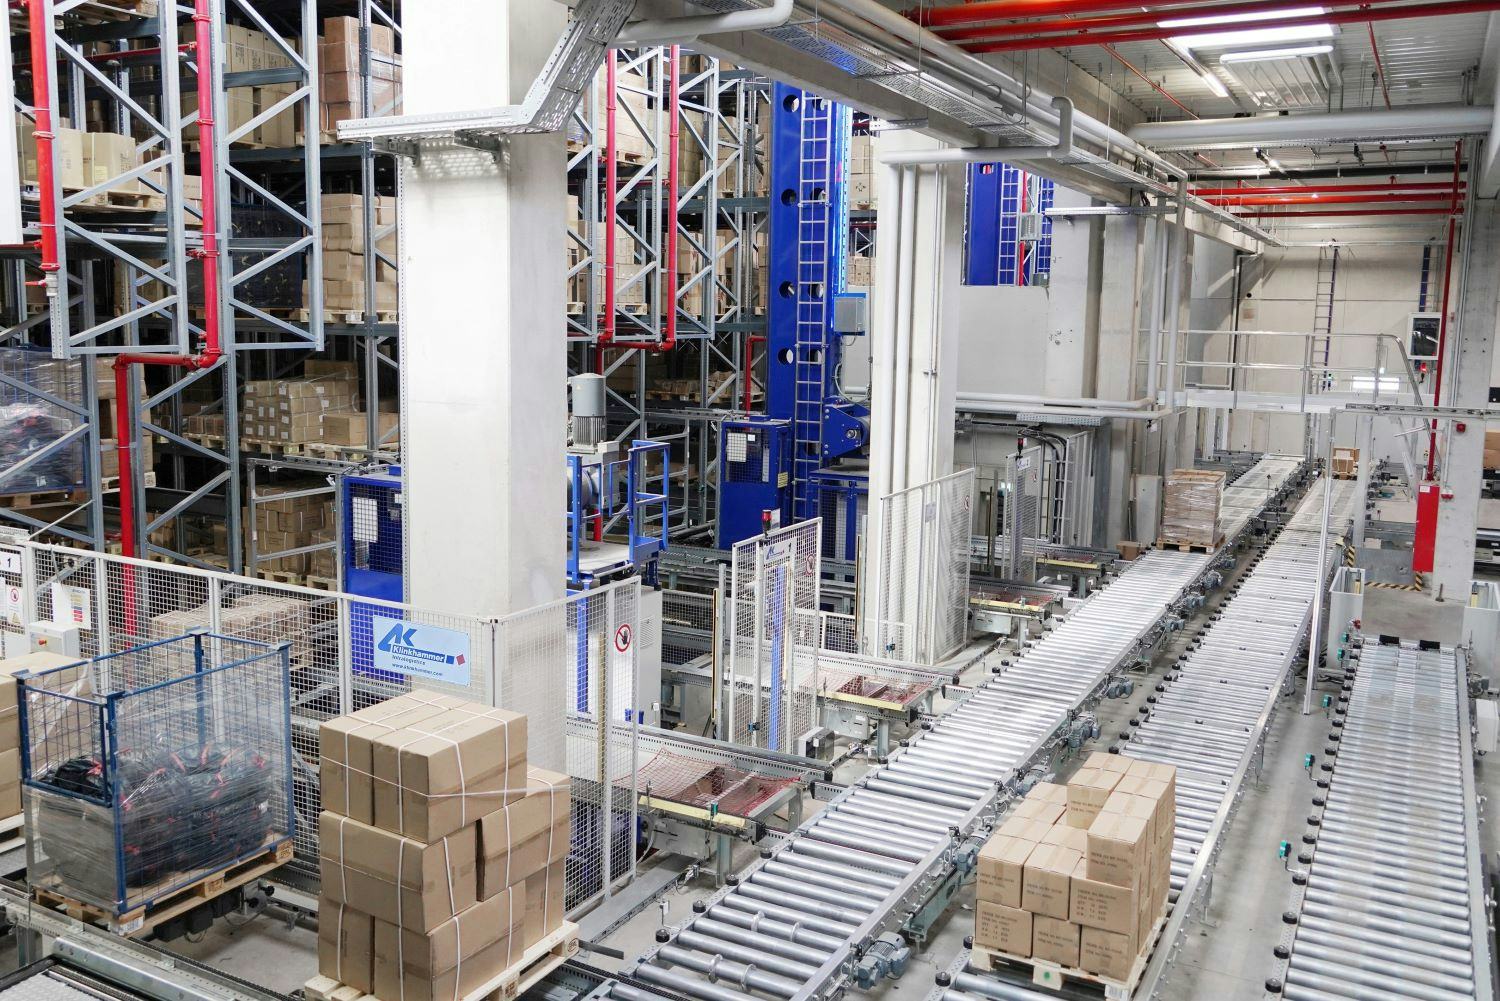 The modernised 4-aisle, automated pallet high-bay warehouse has more than 9,000 storage locations. - Photos Messingschlager 